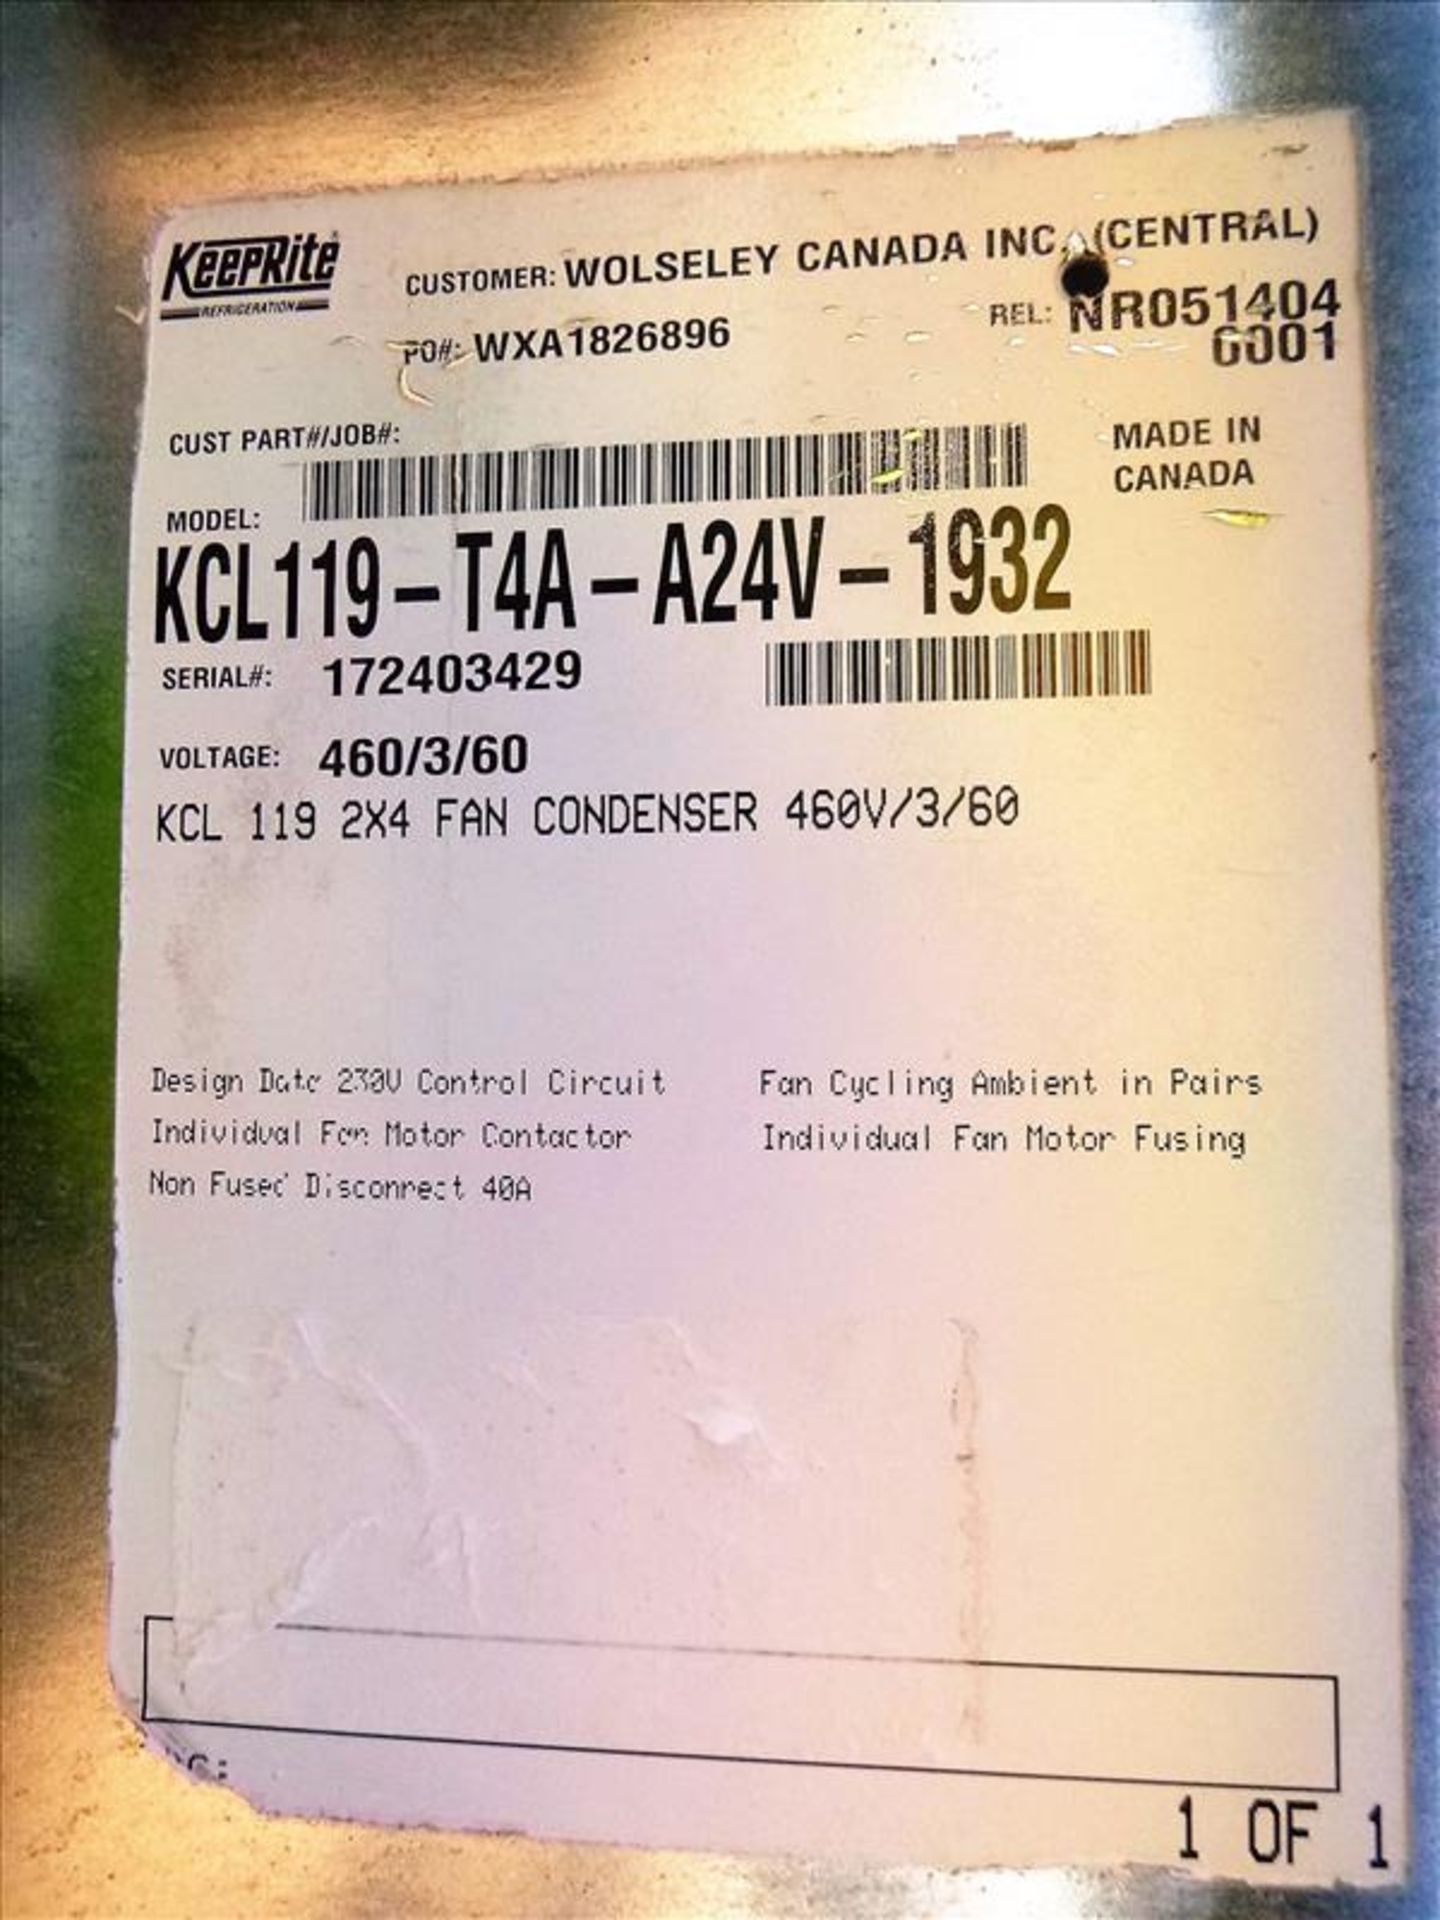 KEEPRITE KCL119-T4A-A24V-1932 Remote Condenser, s/n 172403429, 2x4-Fan - Image 4 of 4